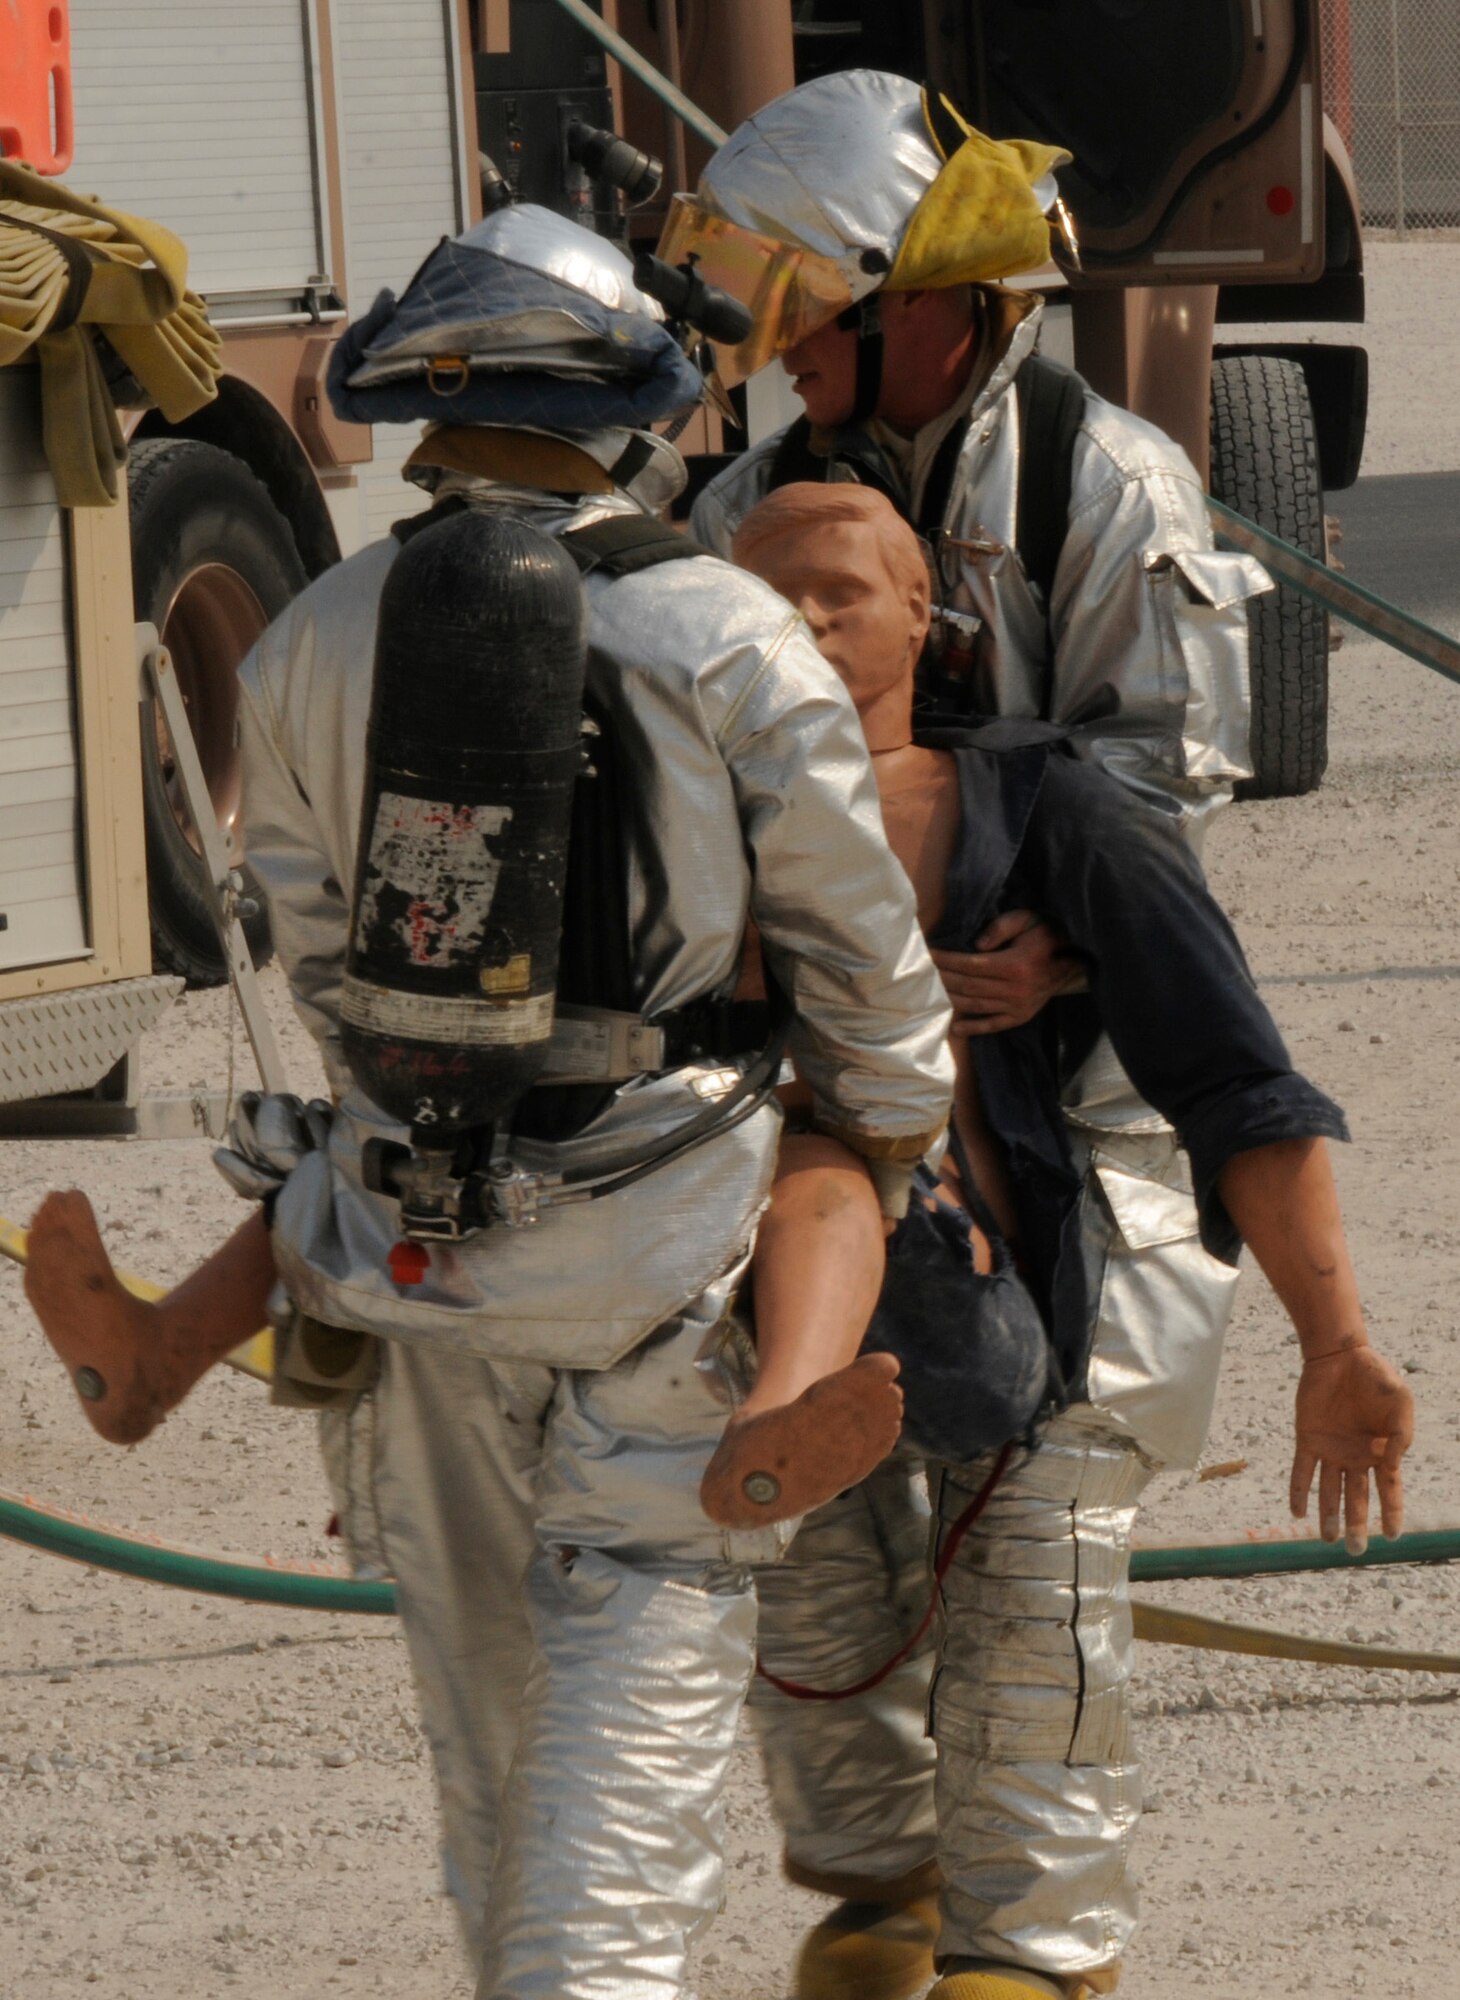 SOUTHWEST ASIA -- Staff Sgt. Benjamin King (left) and Airman 1st Class Neal Krysinski, 379th Expeditionary Civil Engineer Squadron Fire Department, carry a dummy victim out of a smoke-filled facility during an exercise here Aug. 29. Fire fighters swept the facility for personnel, provided aid to any found inside, extinguished the fire and cleared the building of smoke. Airman Krysinski is from MacDill Air Force Base, Fla. (U.S. Air Force photo by Tech. Sgt. Michael Boquette)